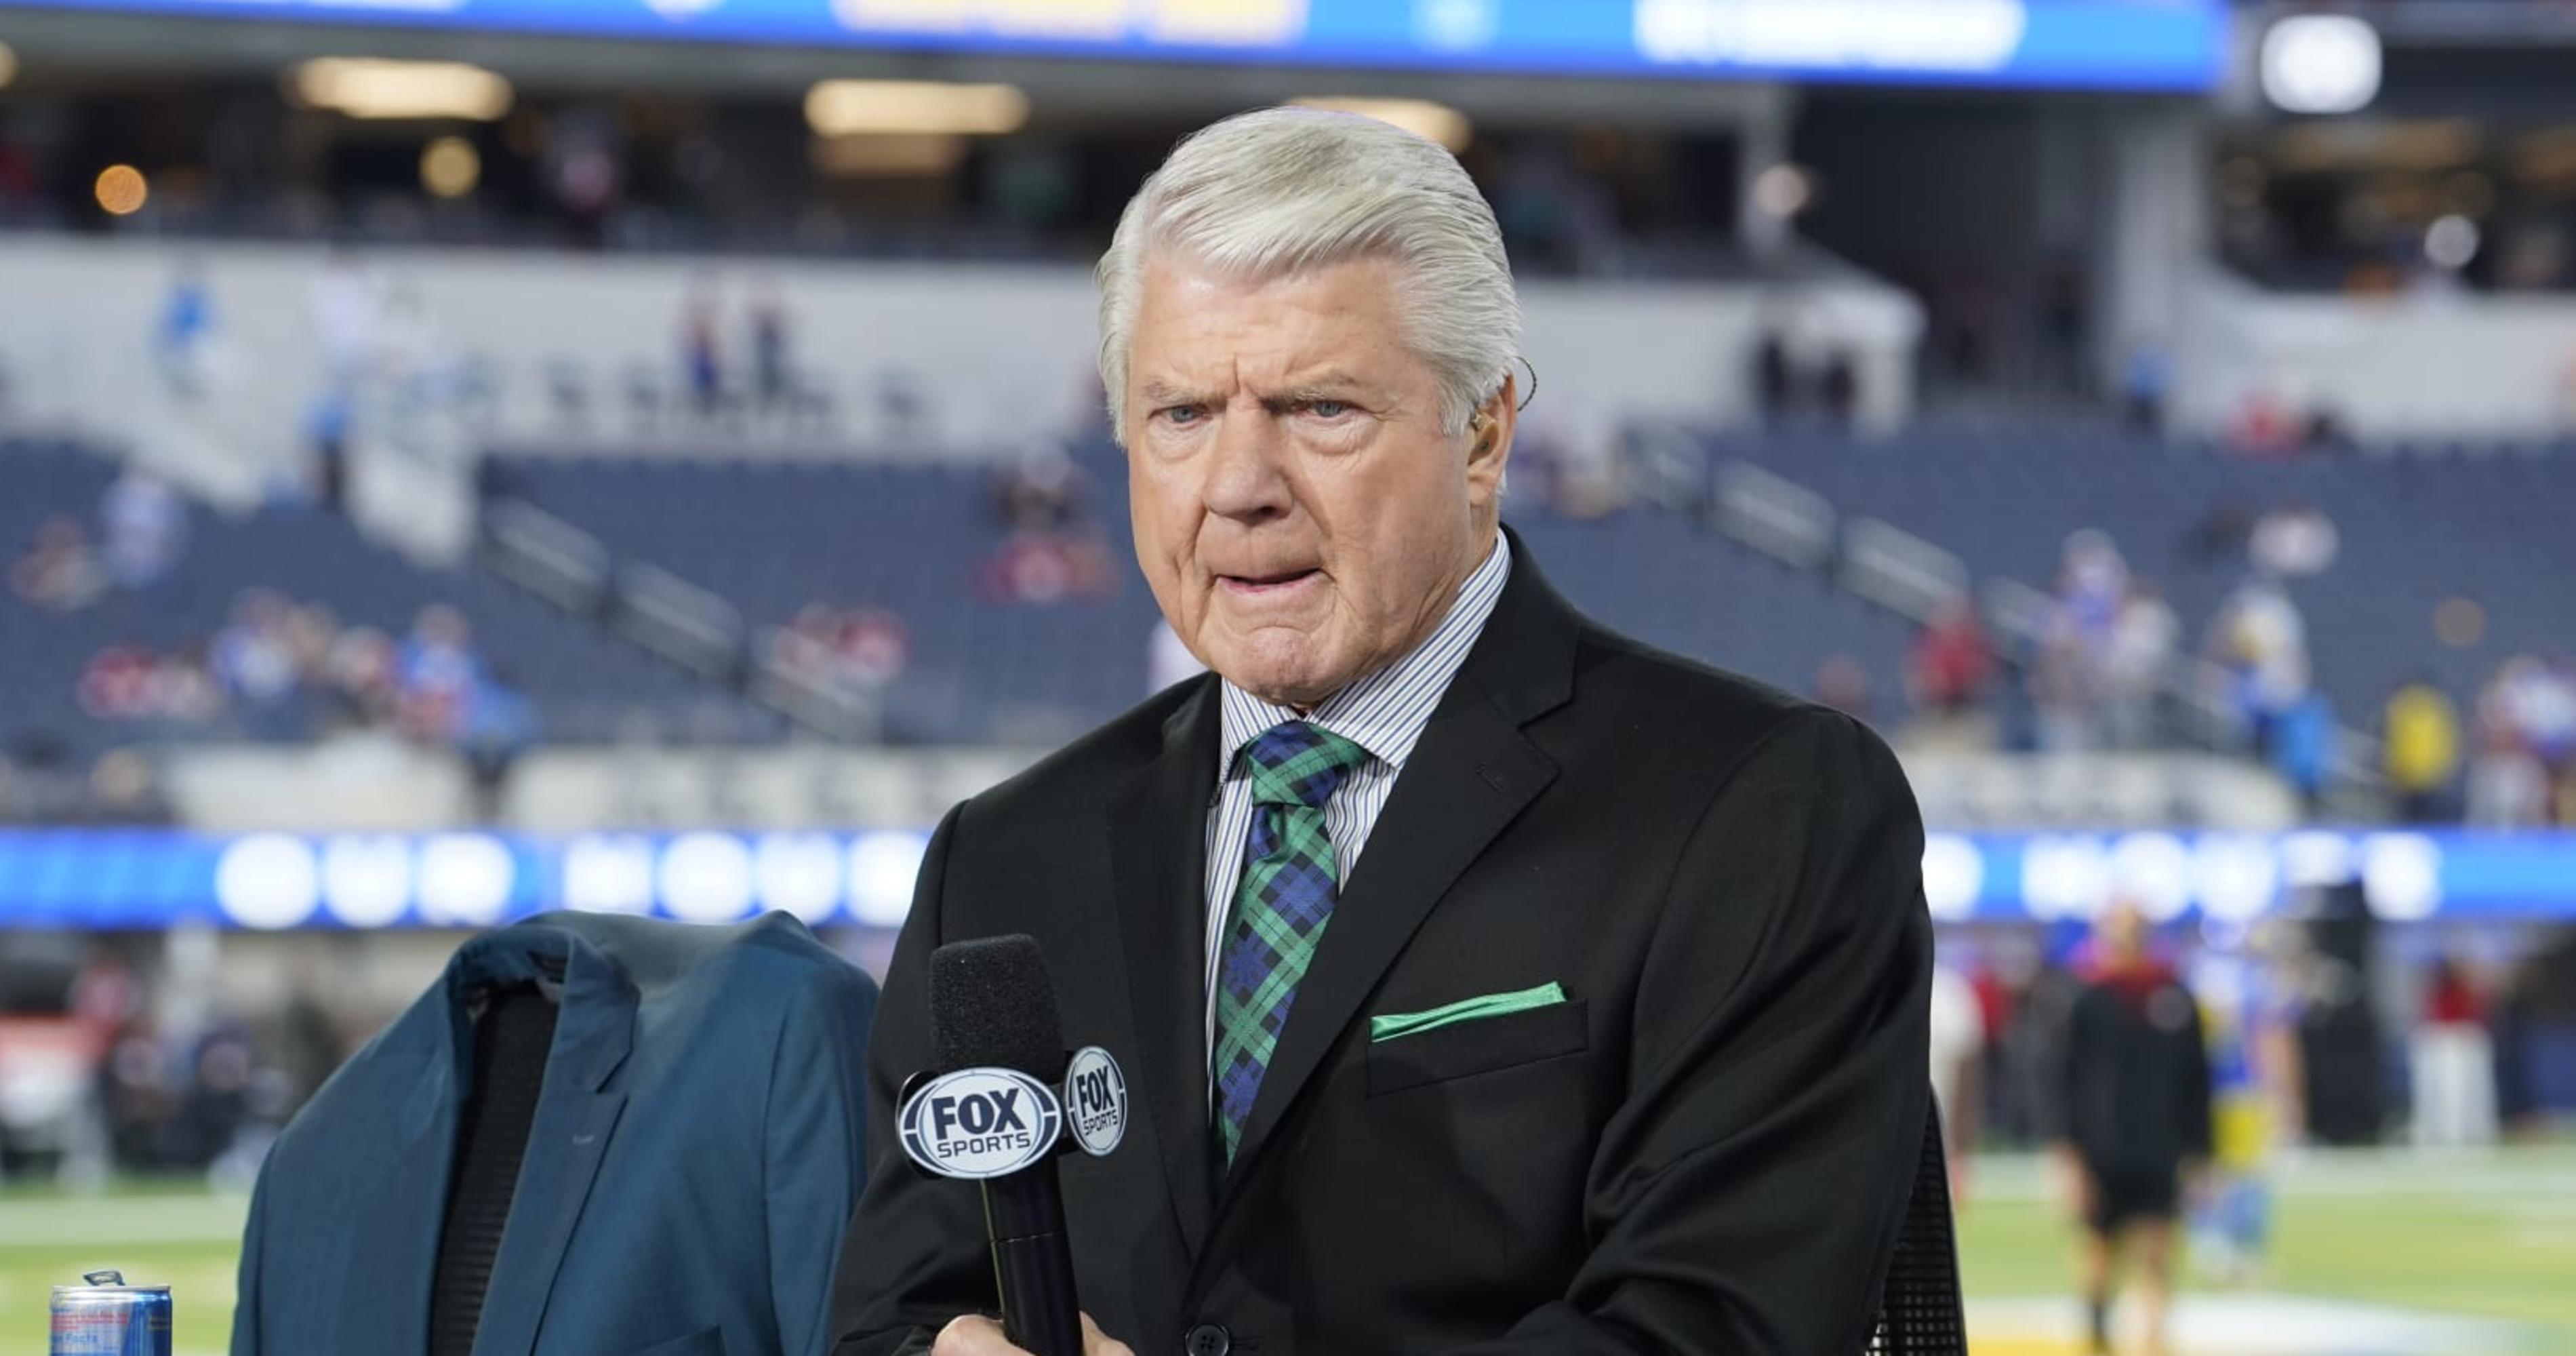 Jimmy Johnson Says 'This Is the Best' Cowboys Team He's Seen, Not Sold on Eagles